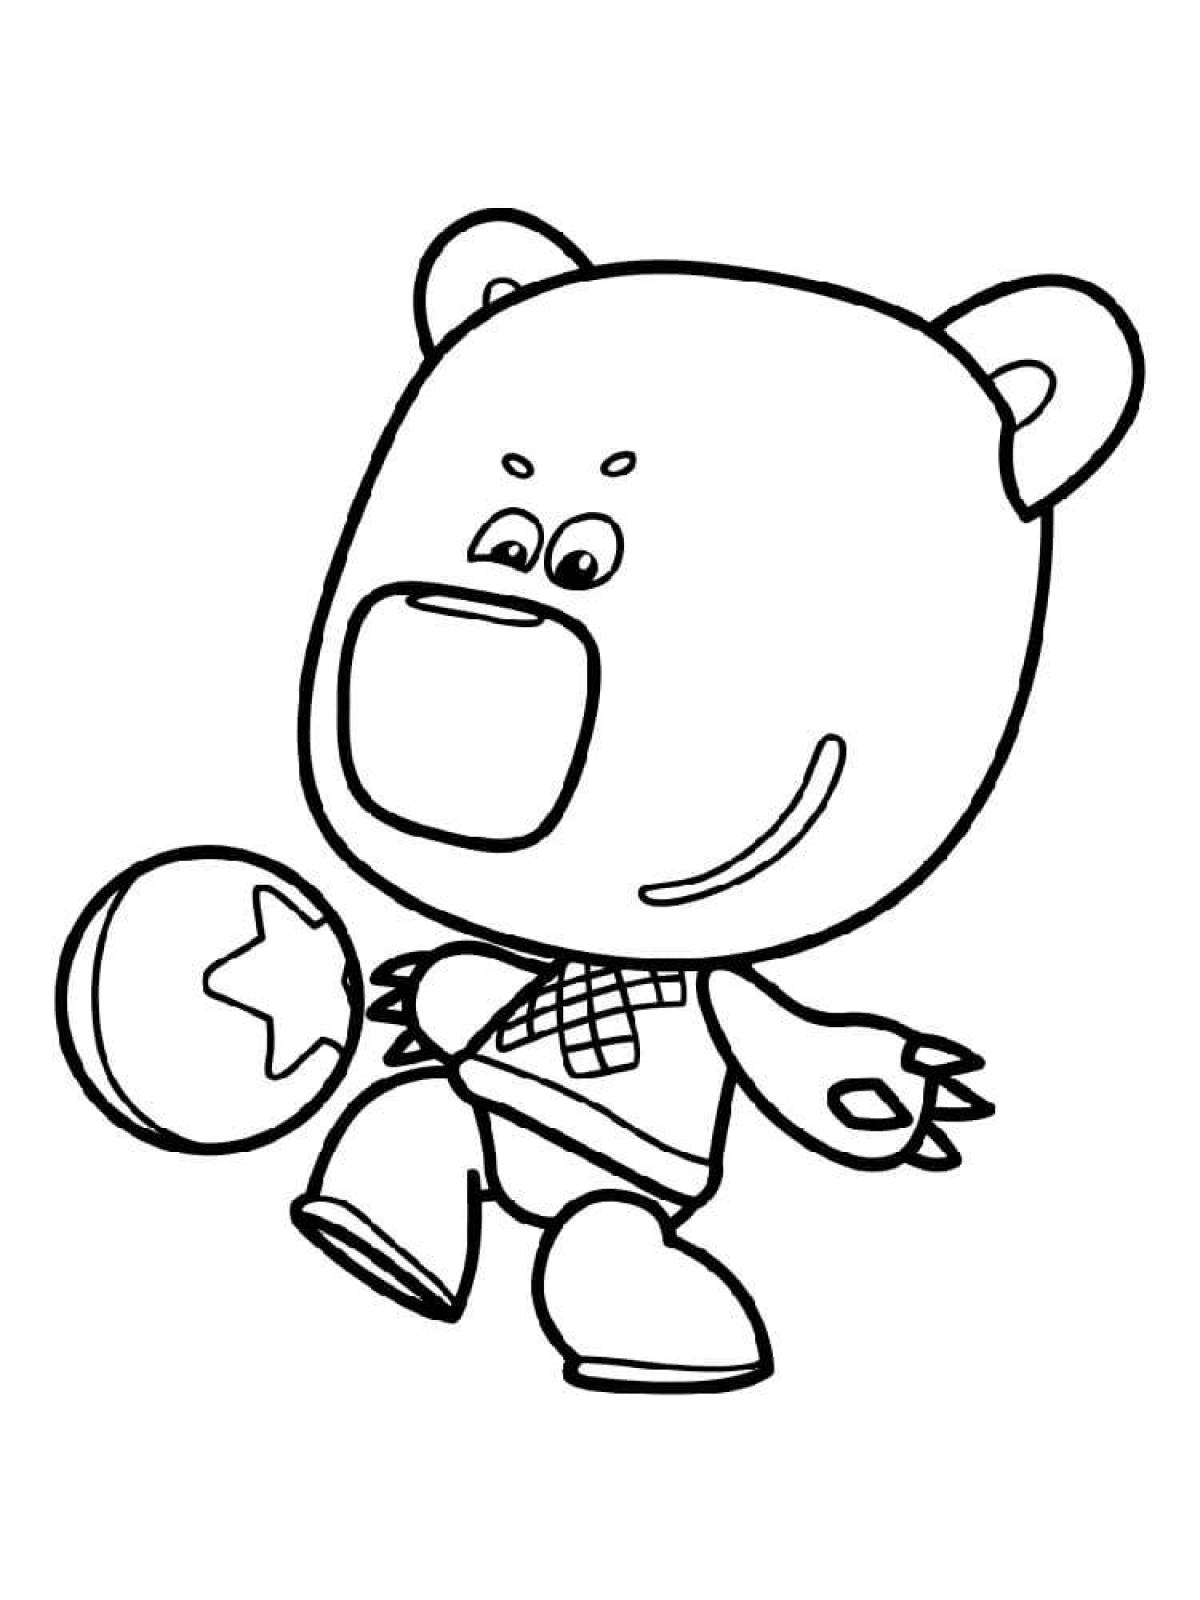 Fluffy bear coloring pages for kids